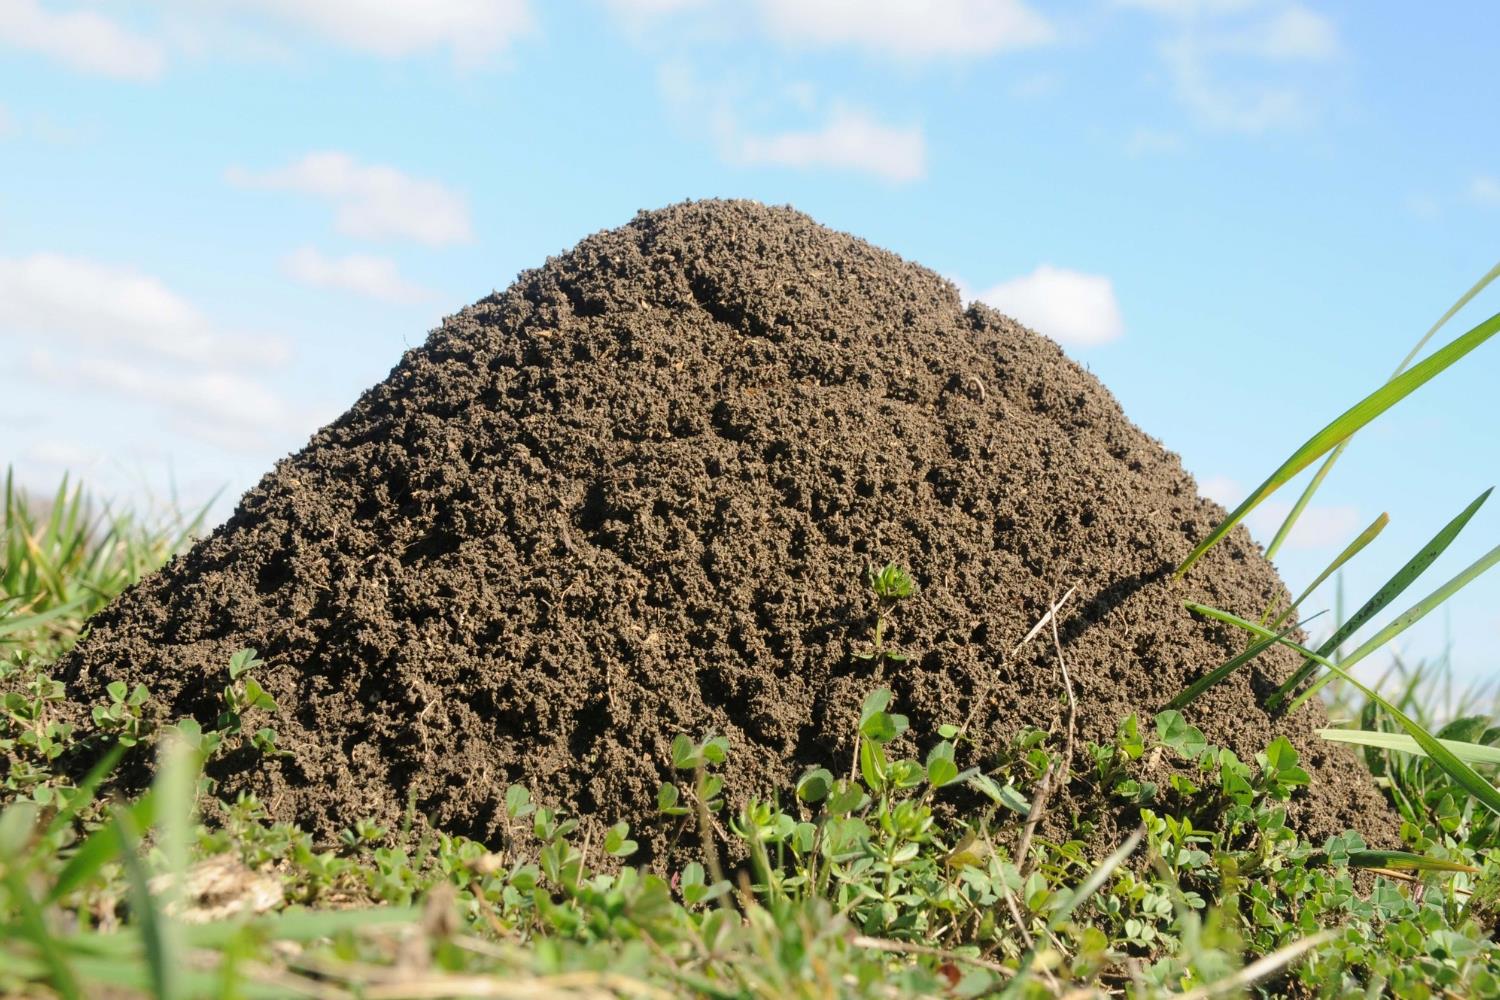 Discover 5 Genius Ways To Eliminate Ant Hills On Your Farm Naturally!